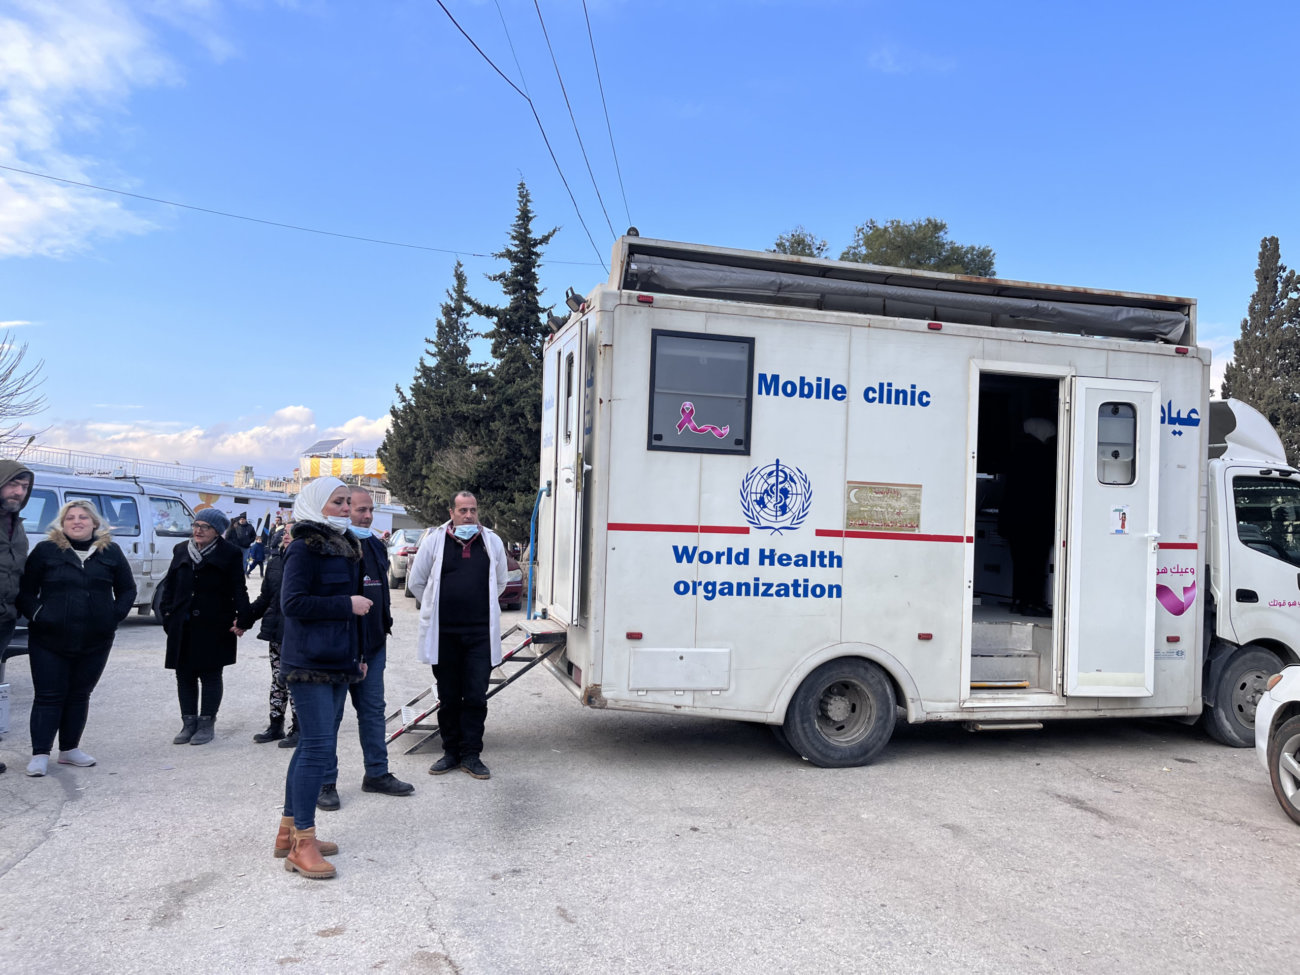 Mobile clinic providing health care consultations as well as medicines for chronic diseases